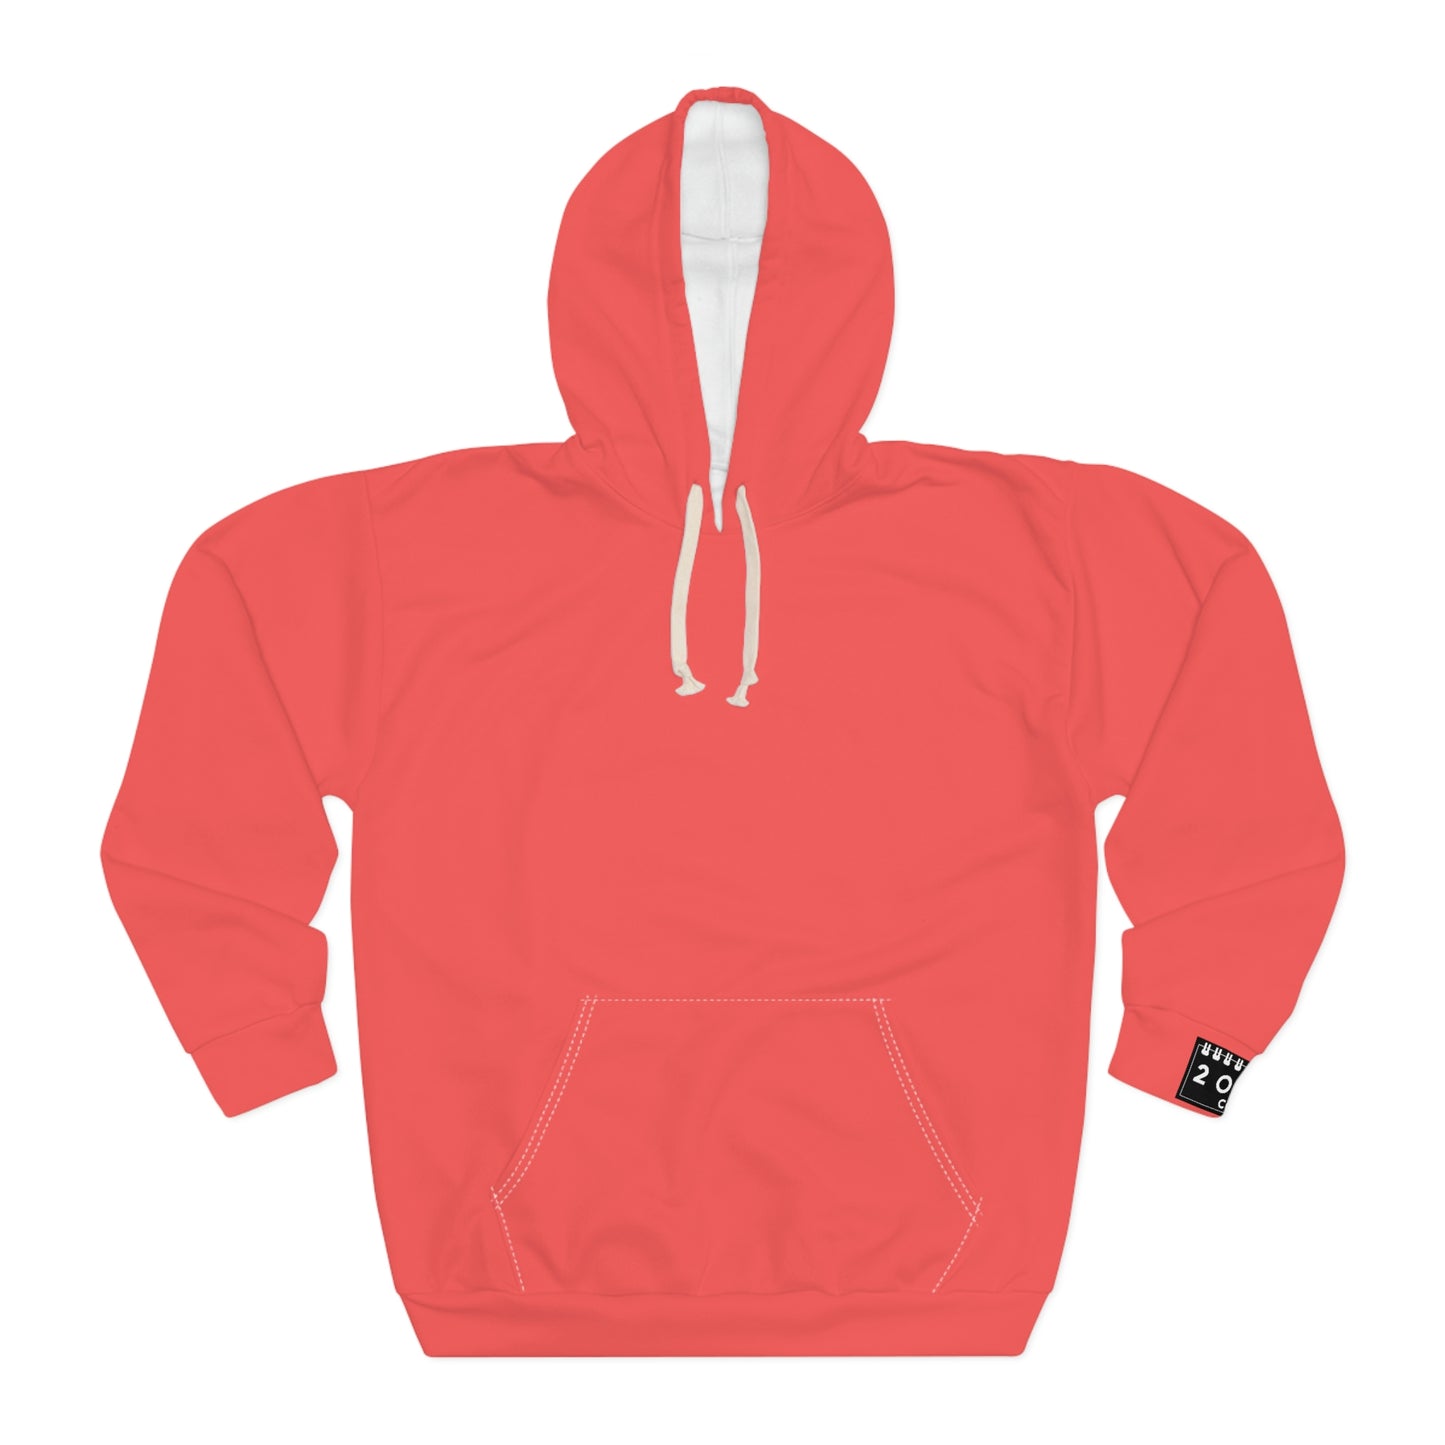 2041 CO UNISEX EVERYDAY HOODIE | WINCHESTER - RC - 2041co